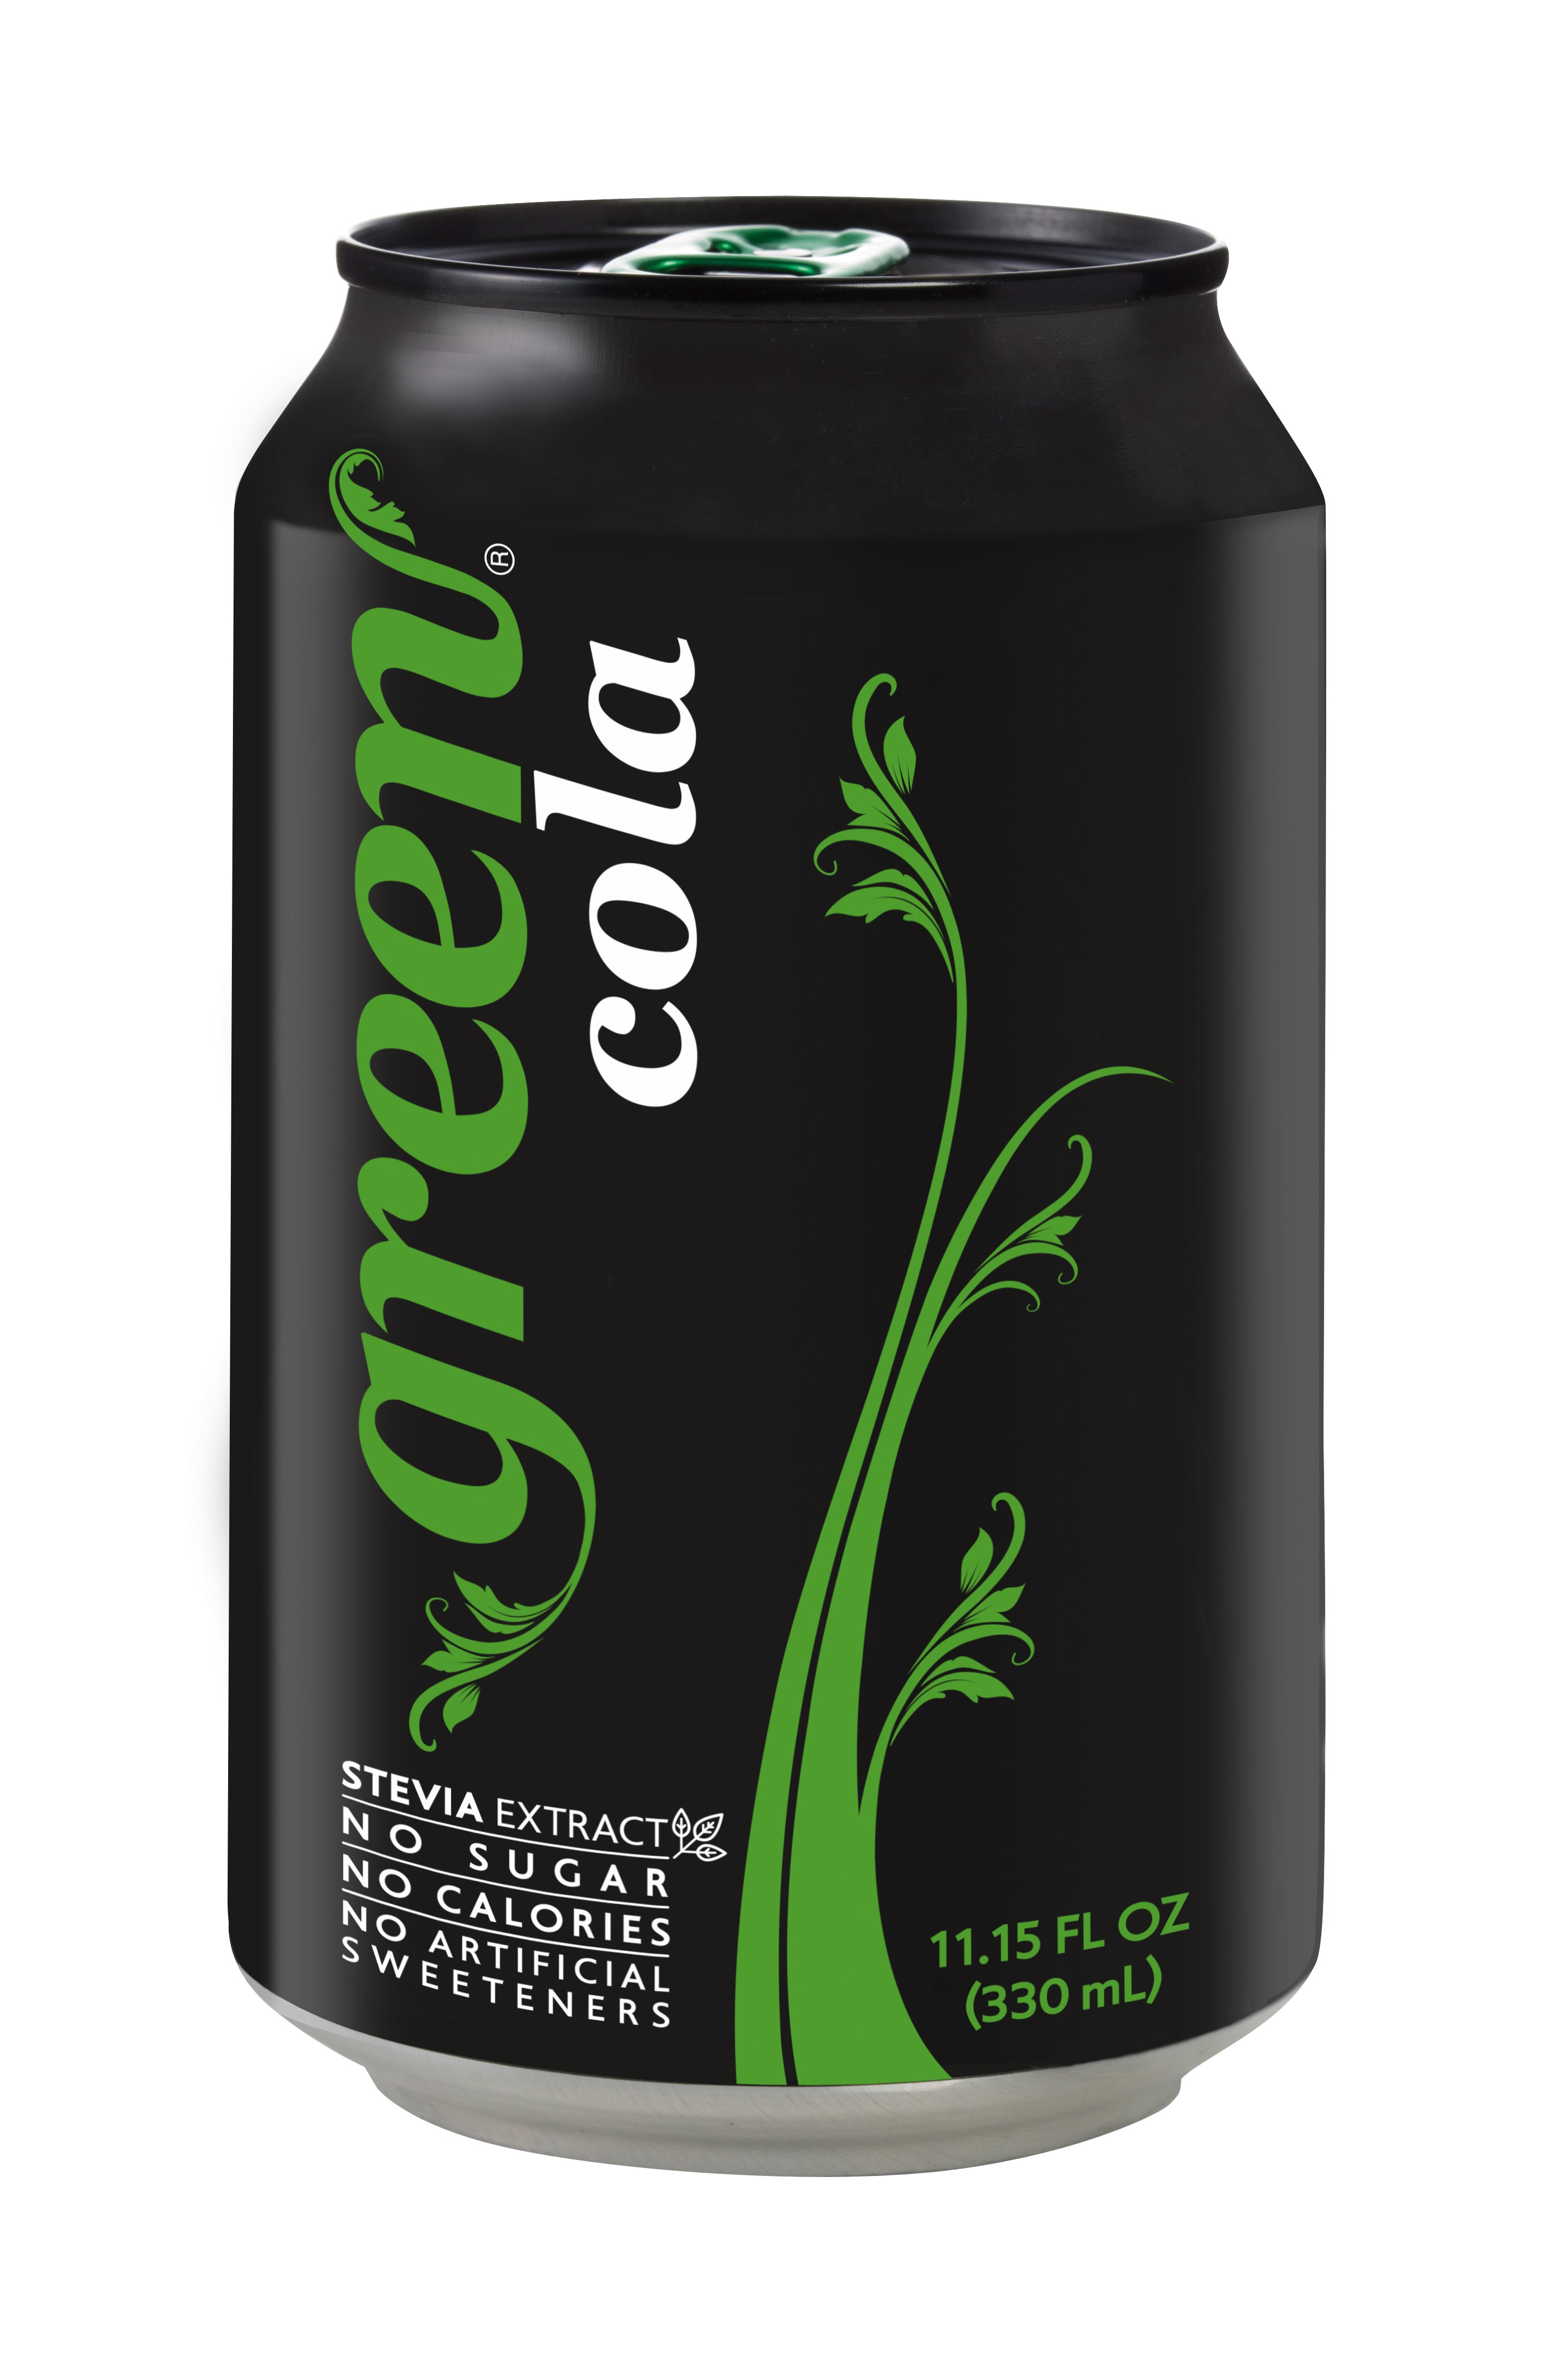 https://www.beveragedaily.com/var/wrbm_gb_food_pharma/storage/images/media/images/green_cola_can-330ml_texas-2019/13178810-1-eng-GB/GREEN_COLA_CAN-330ml_texas-2019.jpg